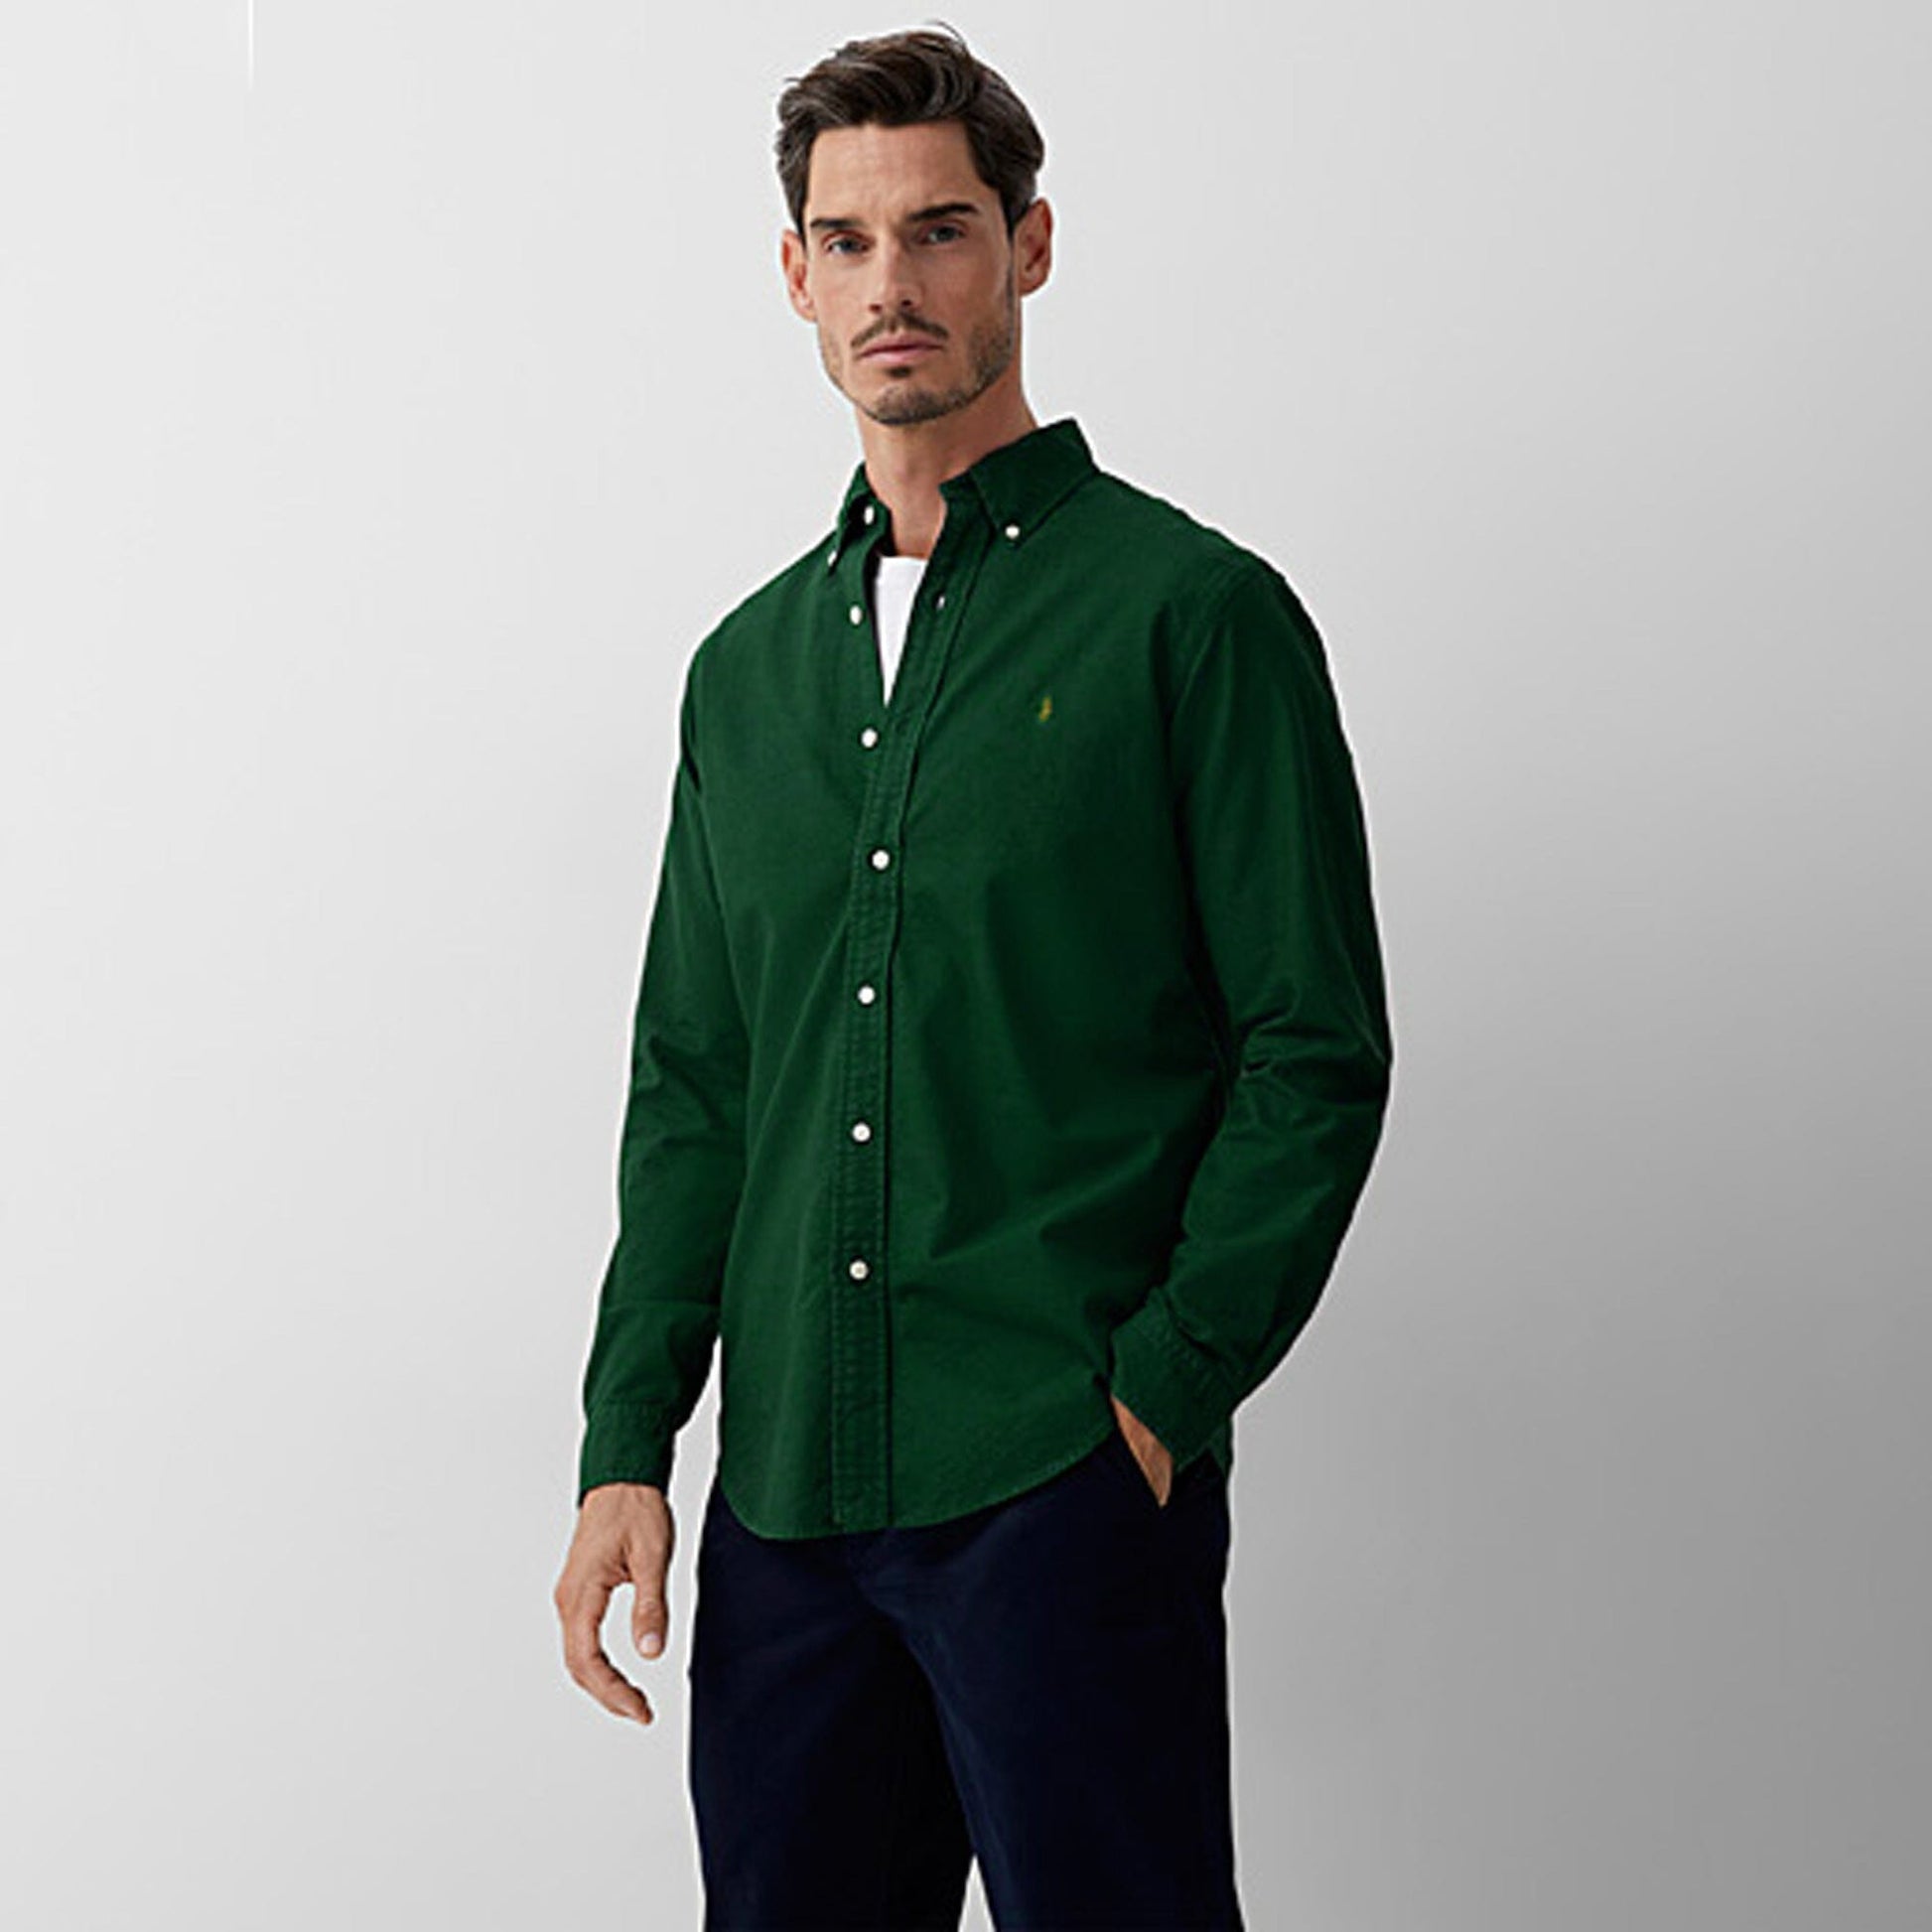 Polo Republica Men's Essentials Knitted Casual Shirt Men's Casual Shirt Polo Republica Bottle Green S 